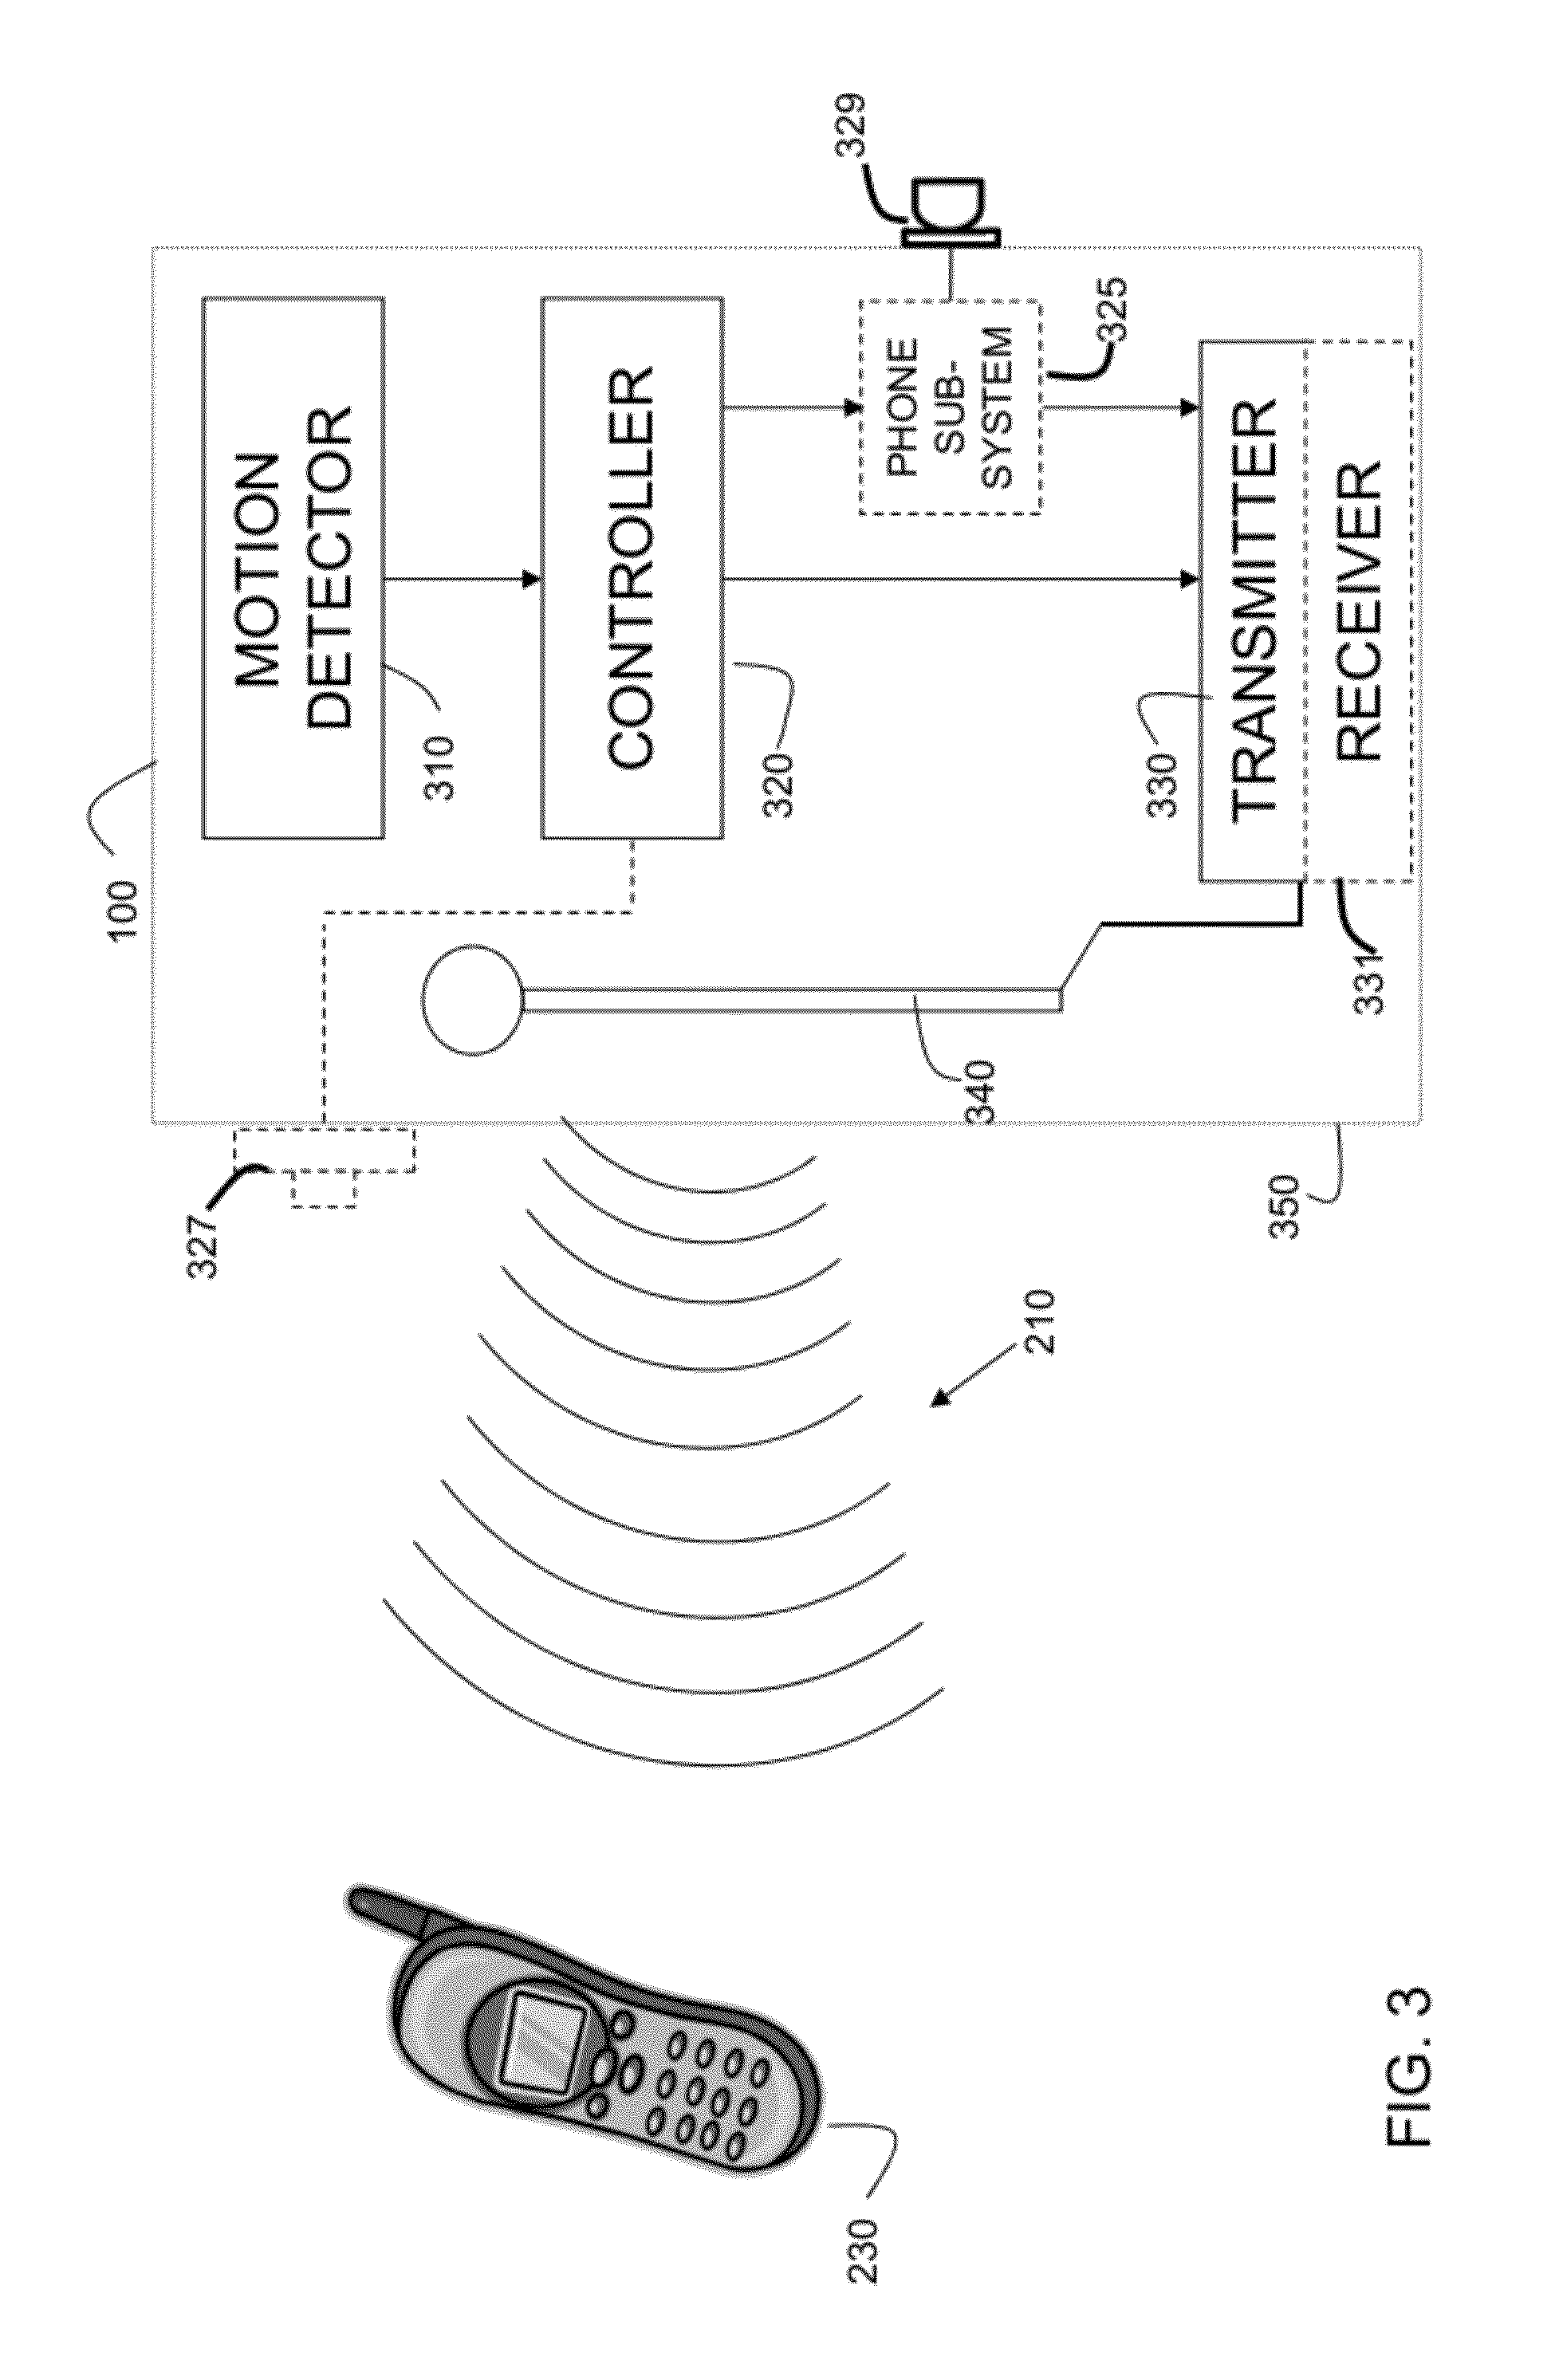 Vehicle safety device for reducing driver distractions